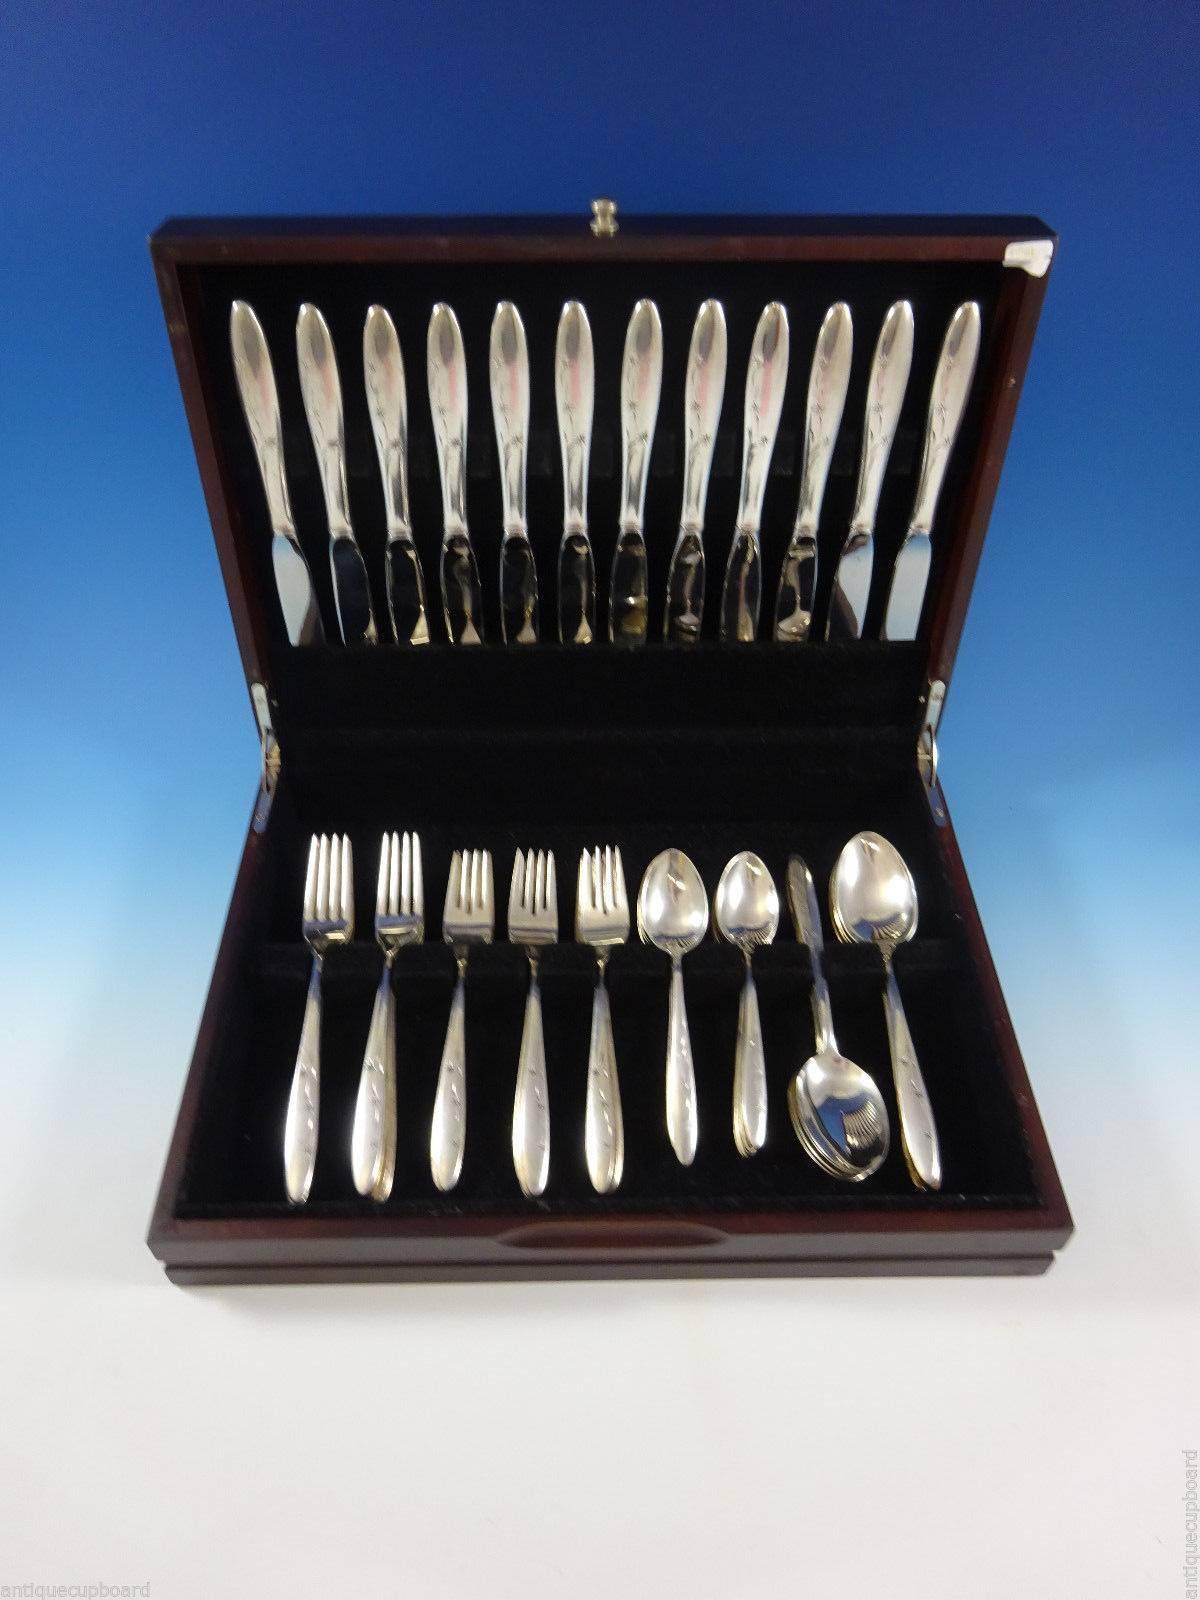 Celeste by Gorham, circa 1956 sterling silver flatware set of 60 pieces. This set includes: 

12 knives, 9 3/8